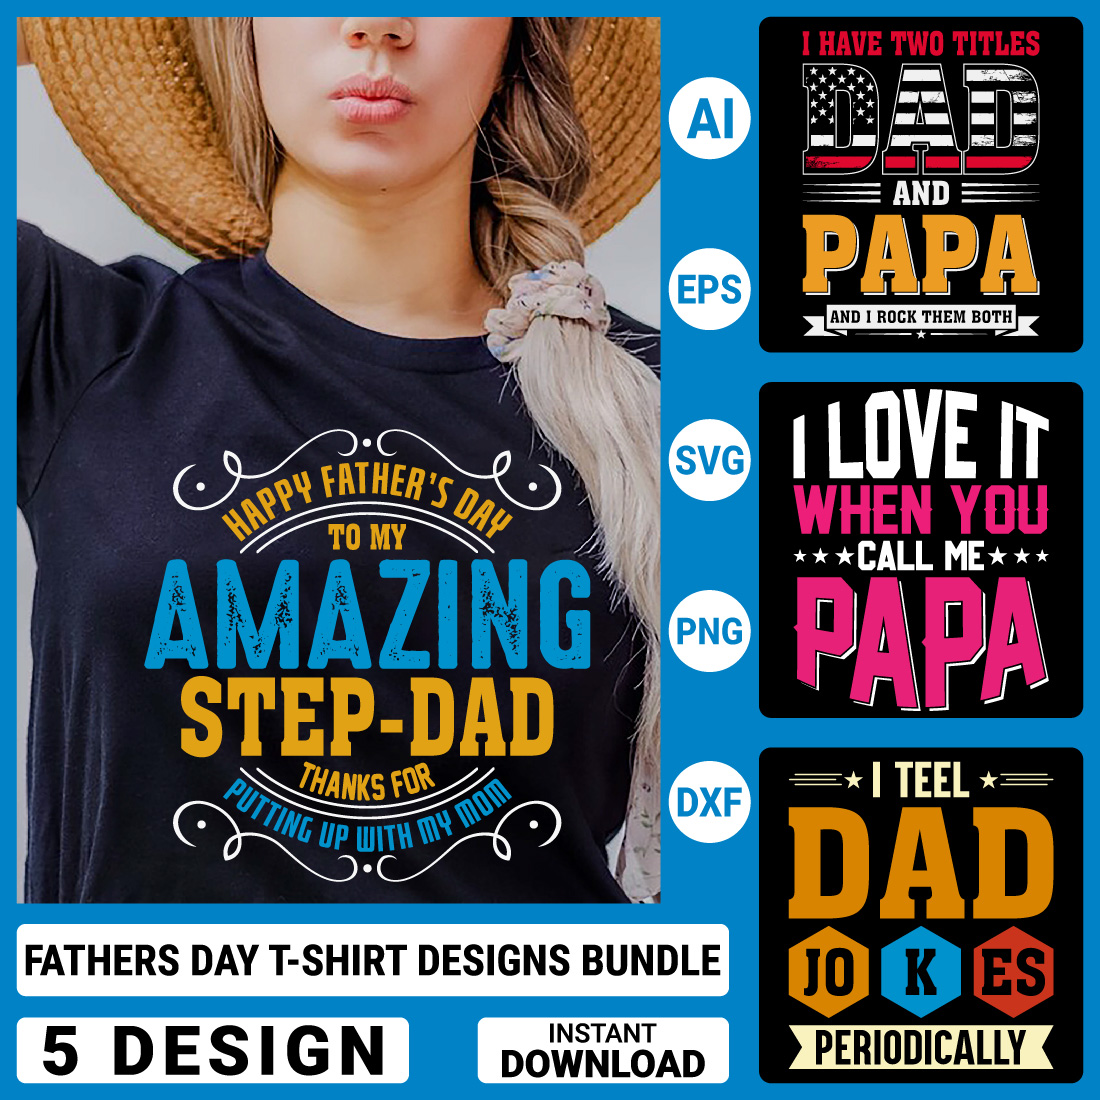 5 Dad T-shirt Designs Bundle, Fathers's Day Quotes typography Graphic T-shirt Collection cover image.